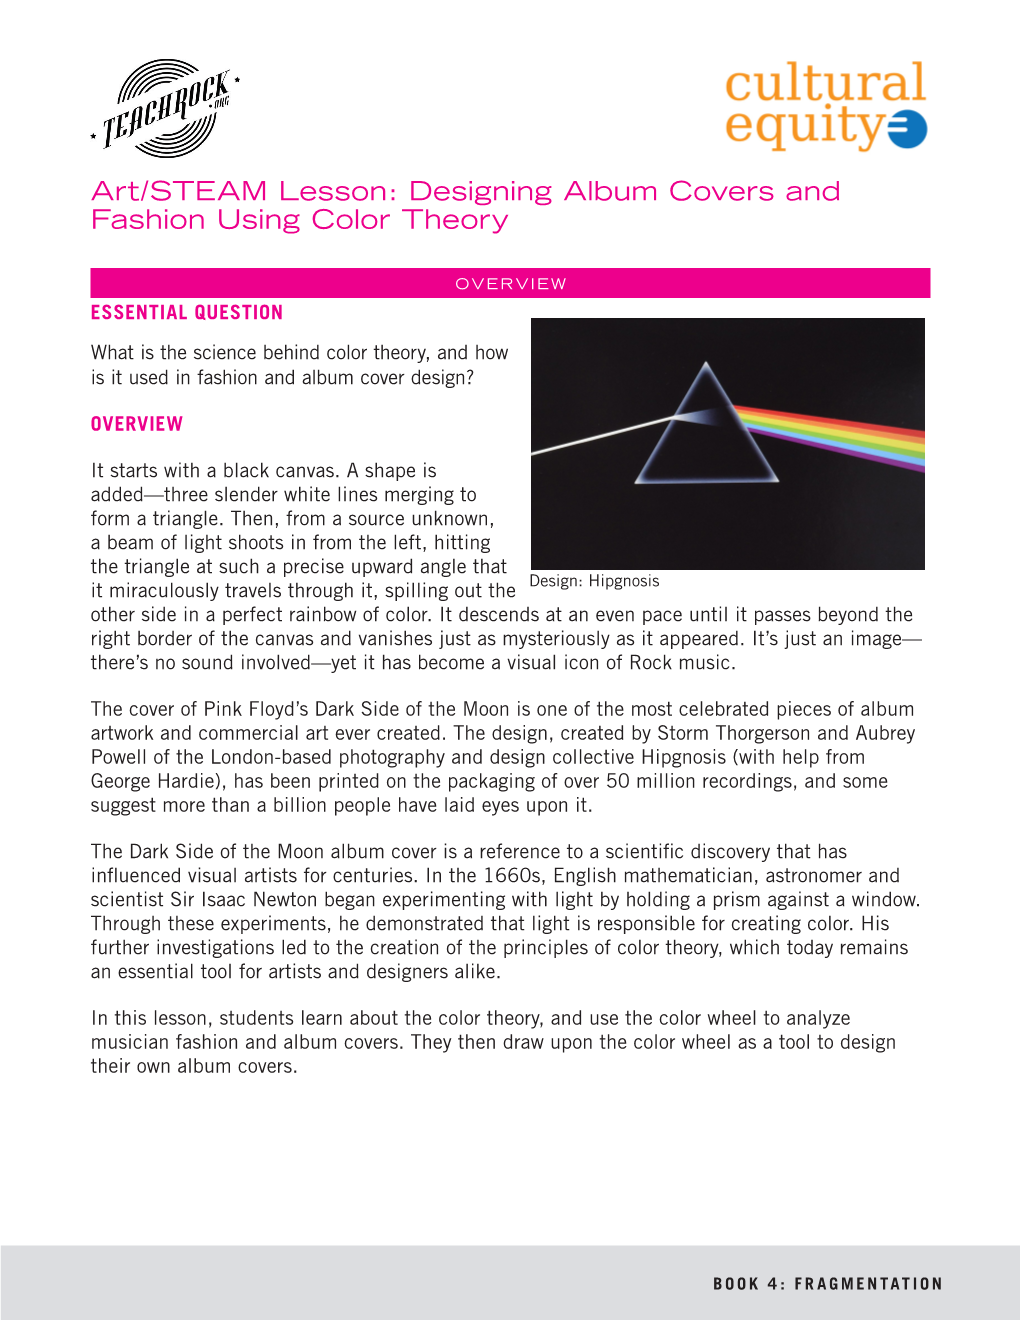 Art/STEAM Lesson: Designing Album Covers and Fashion Using Color Theory